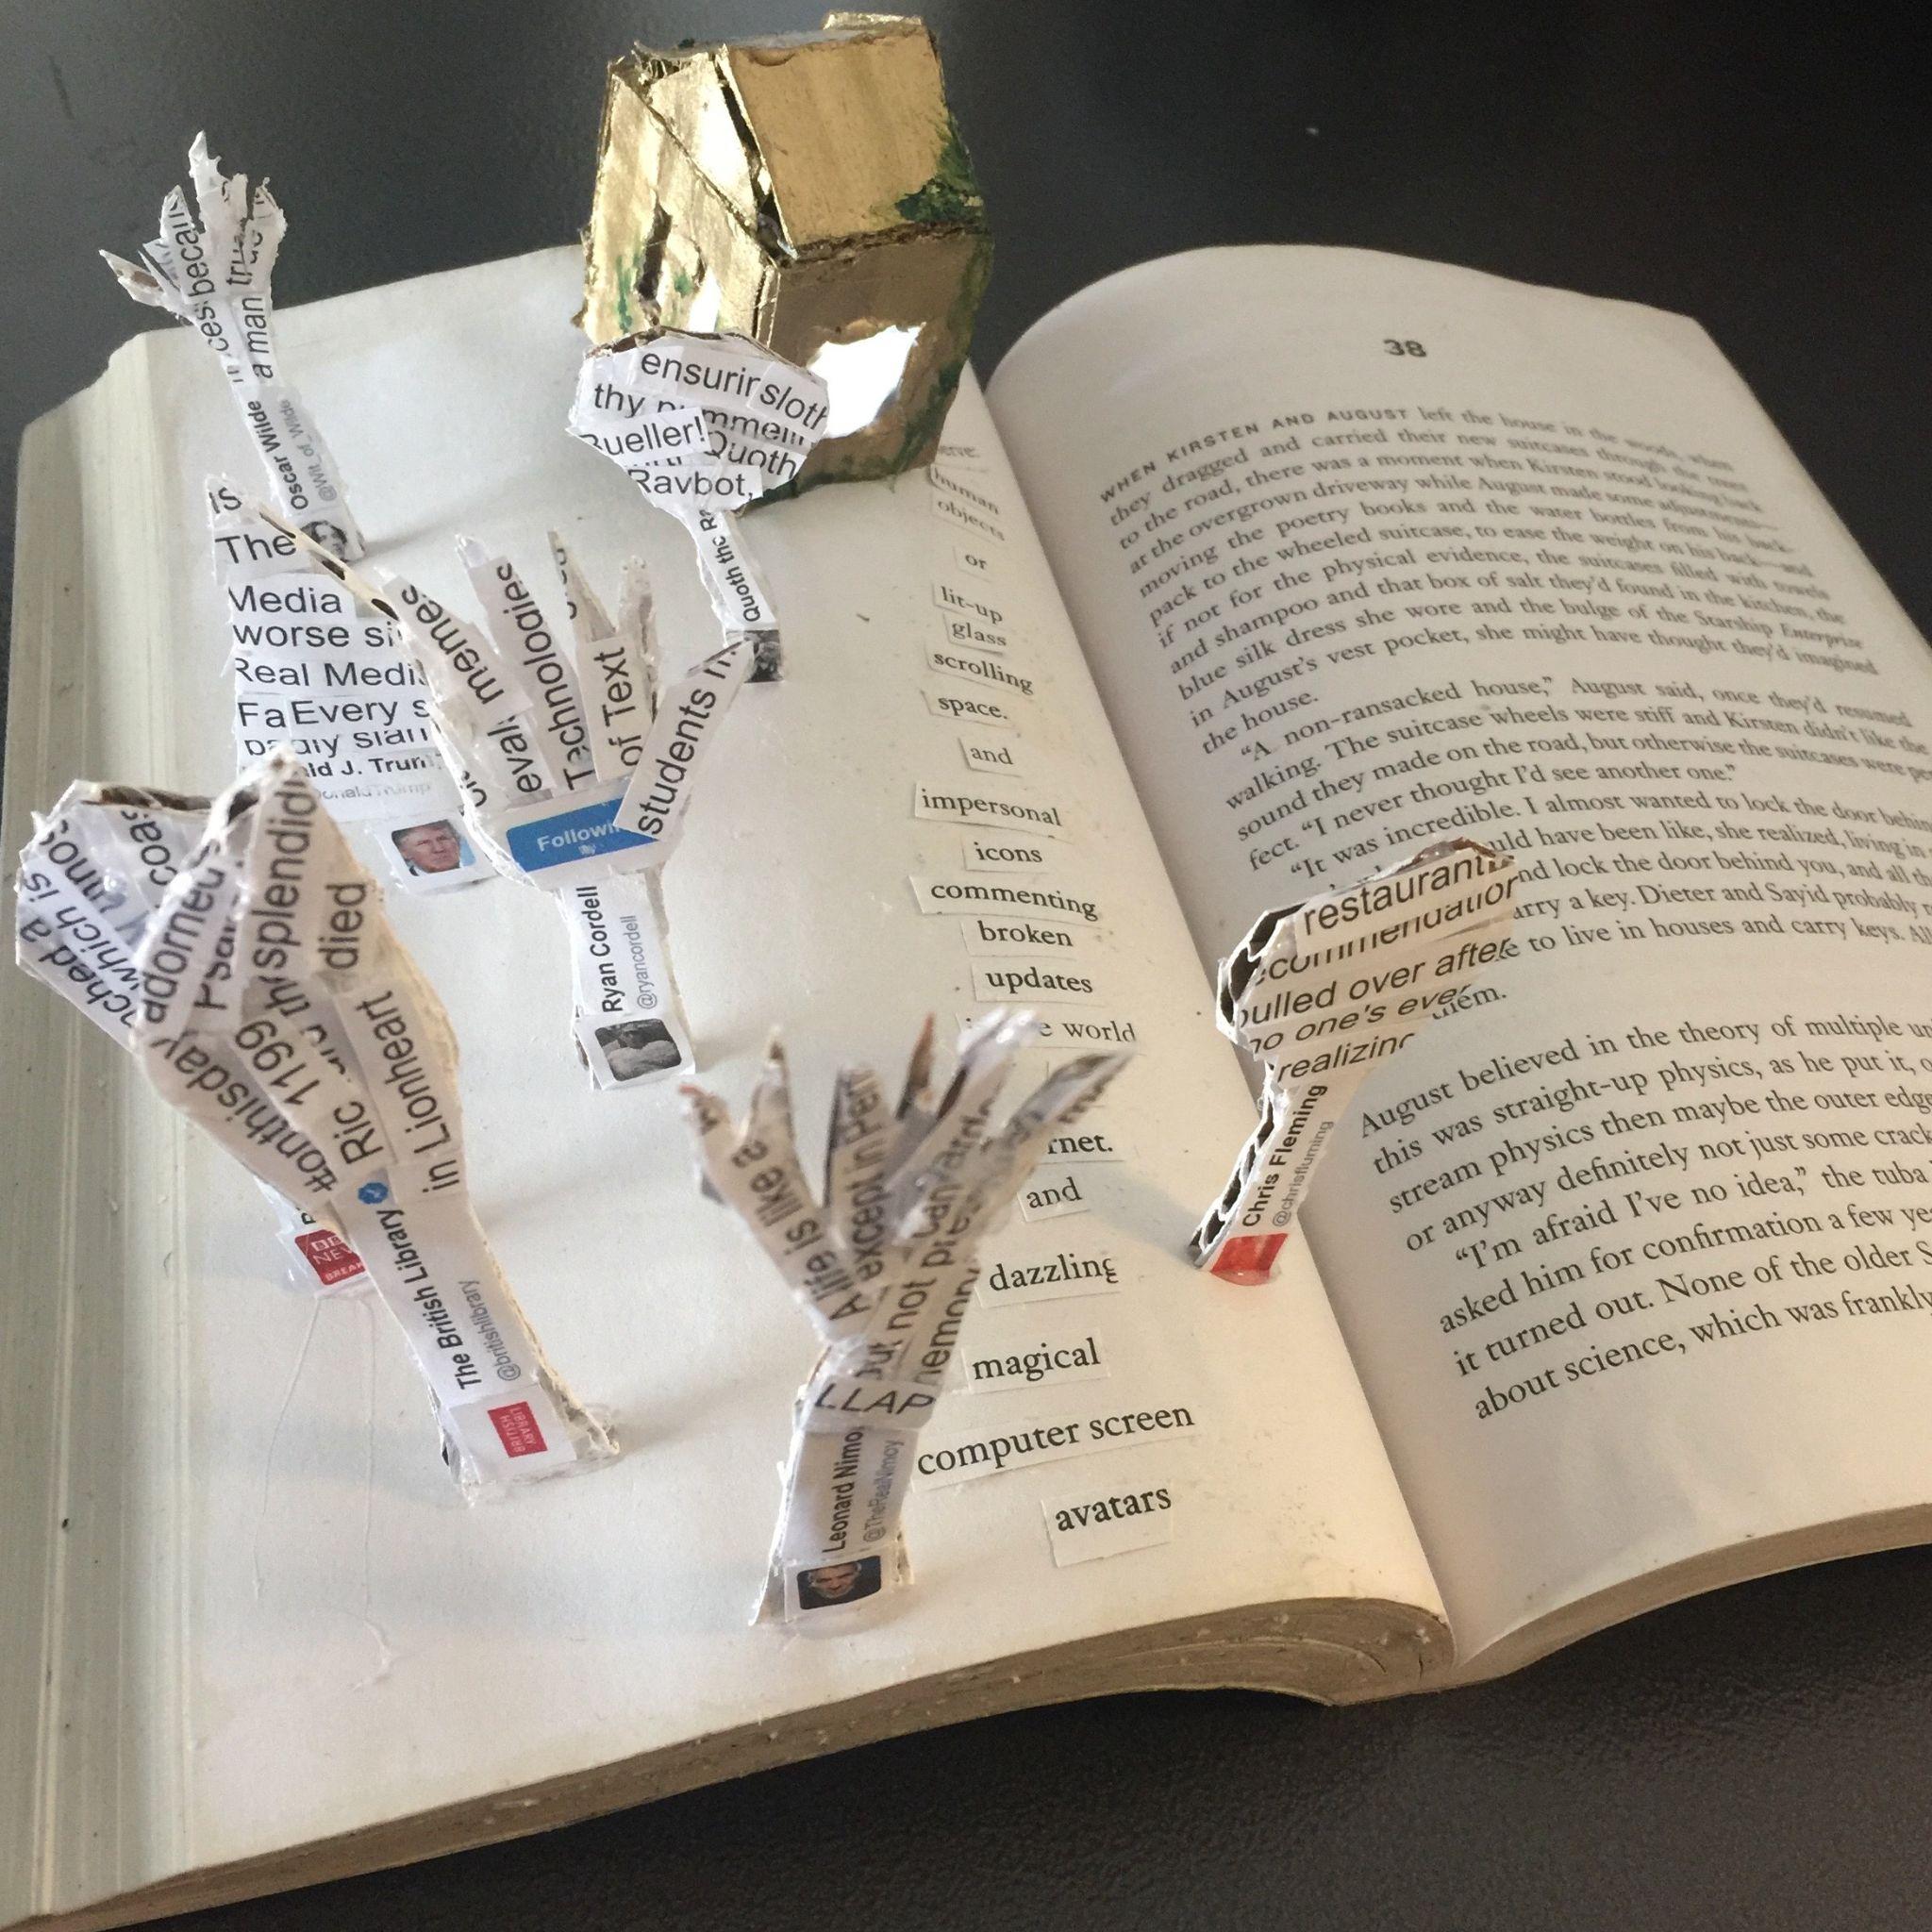 Paper sculpture of house and trees in an open book